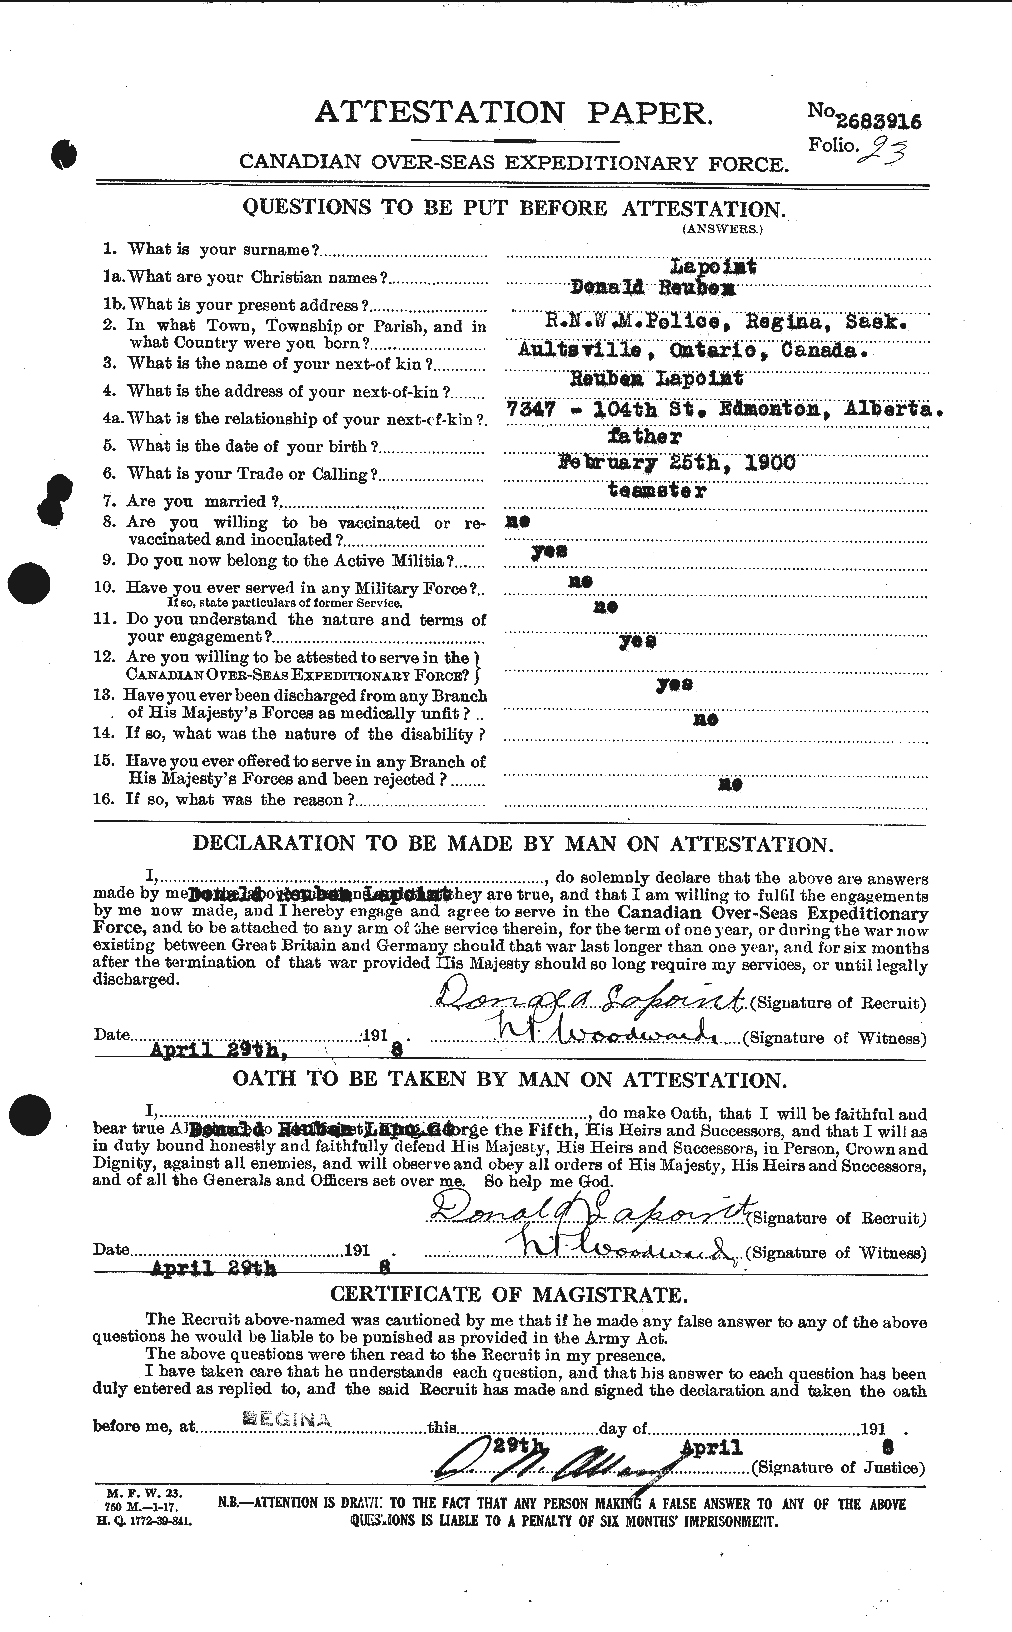 Personnel Records of the First World War - CEF 452465a